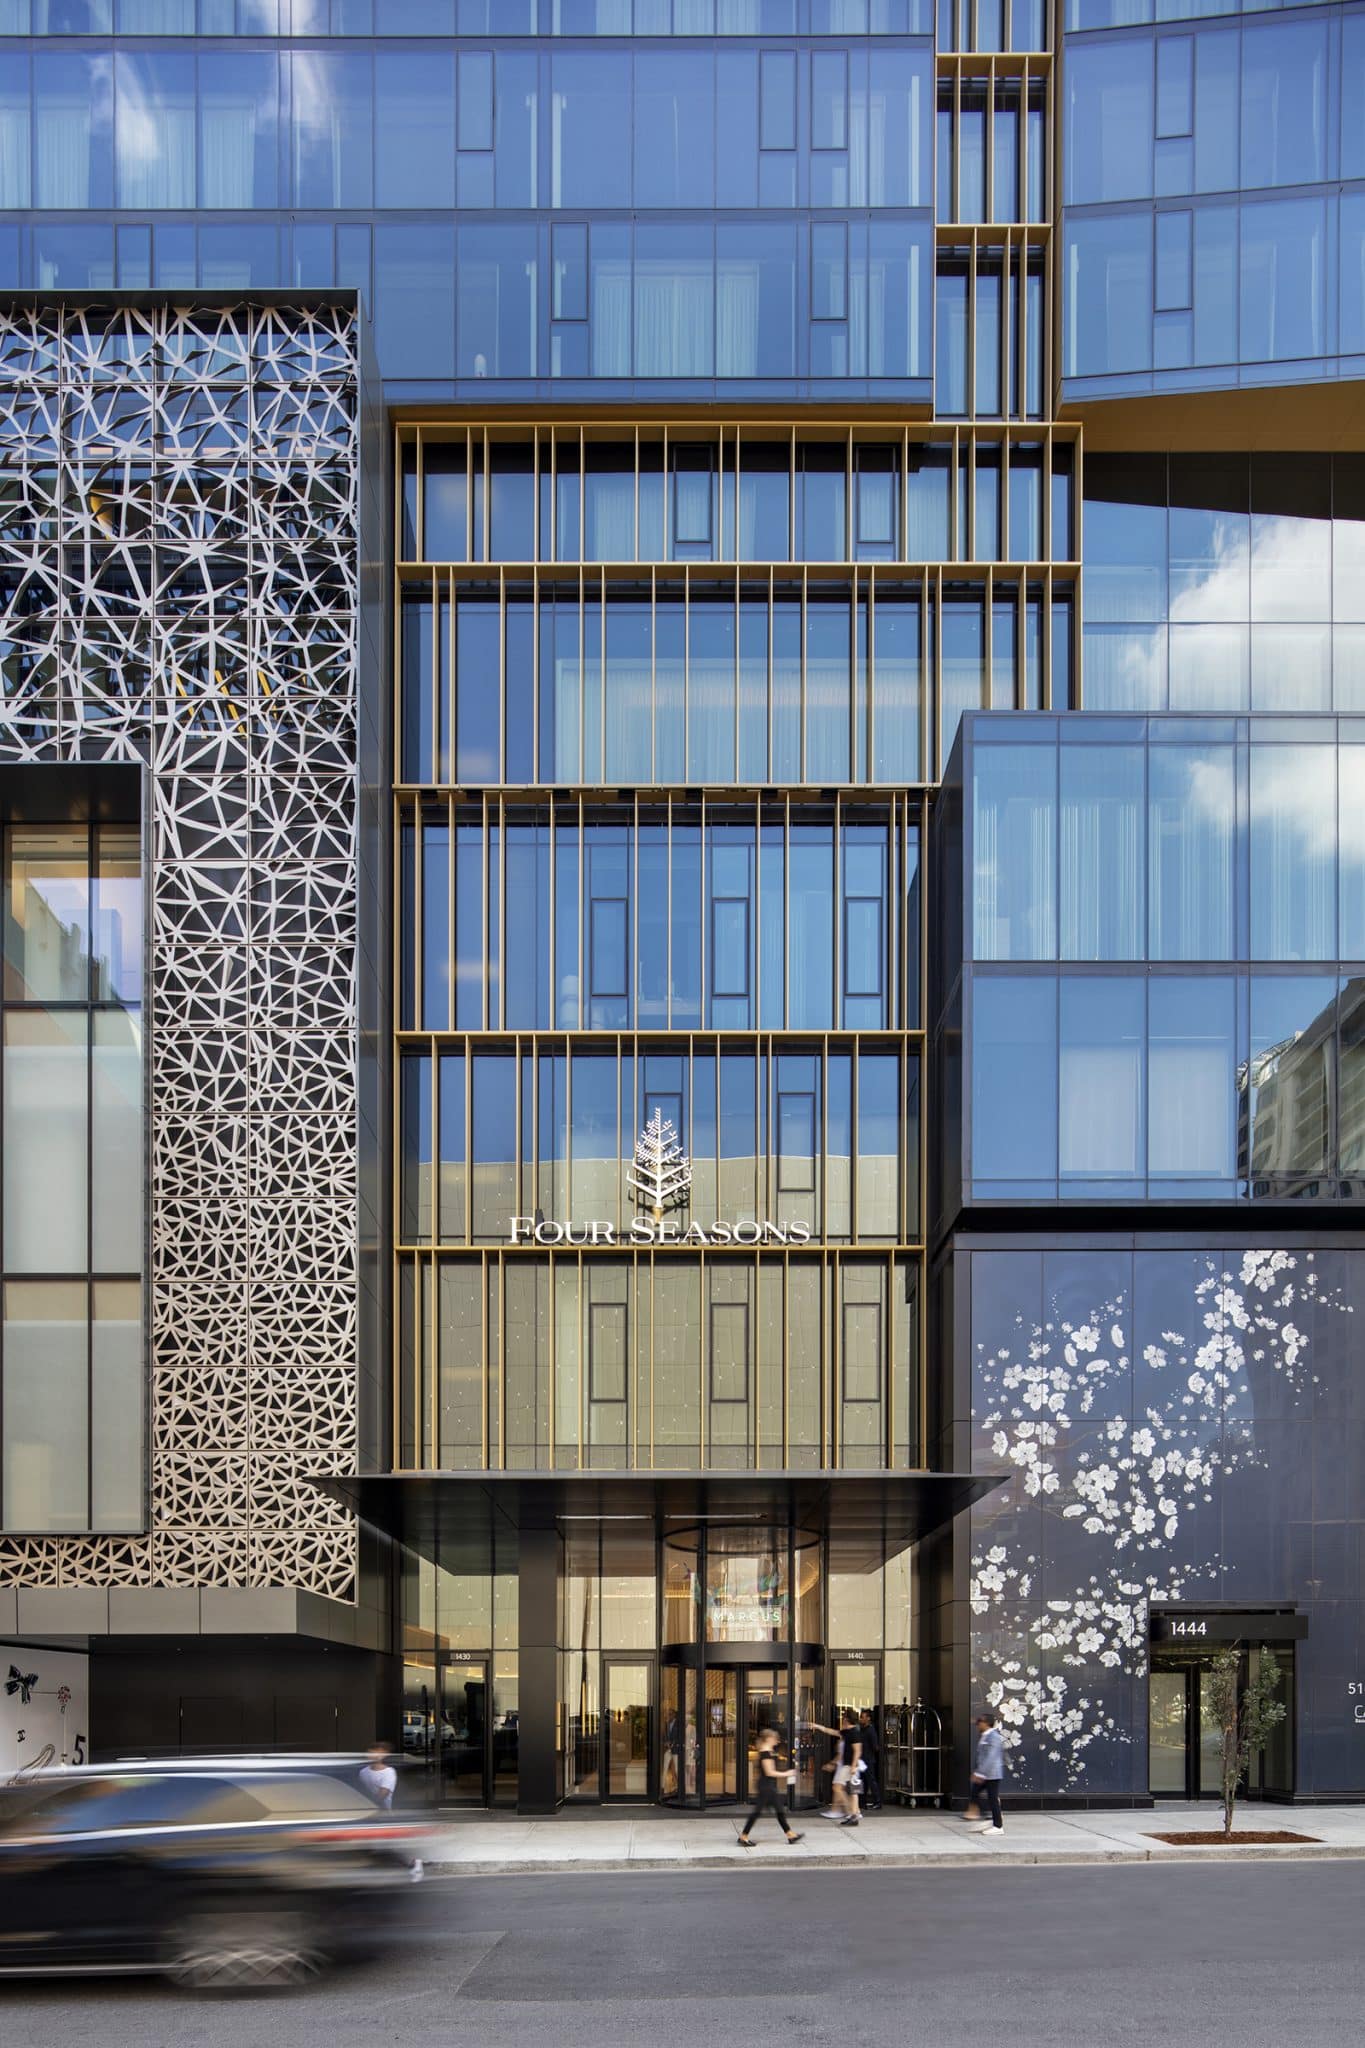 2-four-seasons-montreal-hotel-lemay-architecture-design-credit-adrien-williams-facade